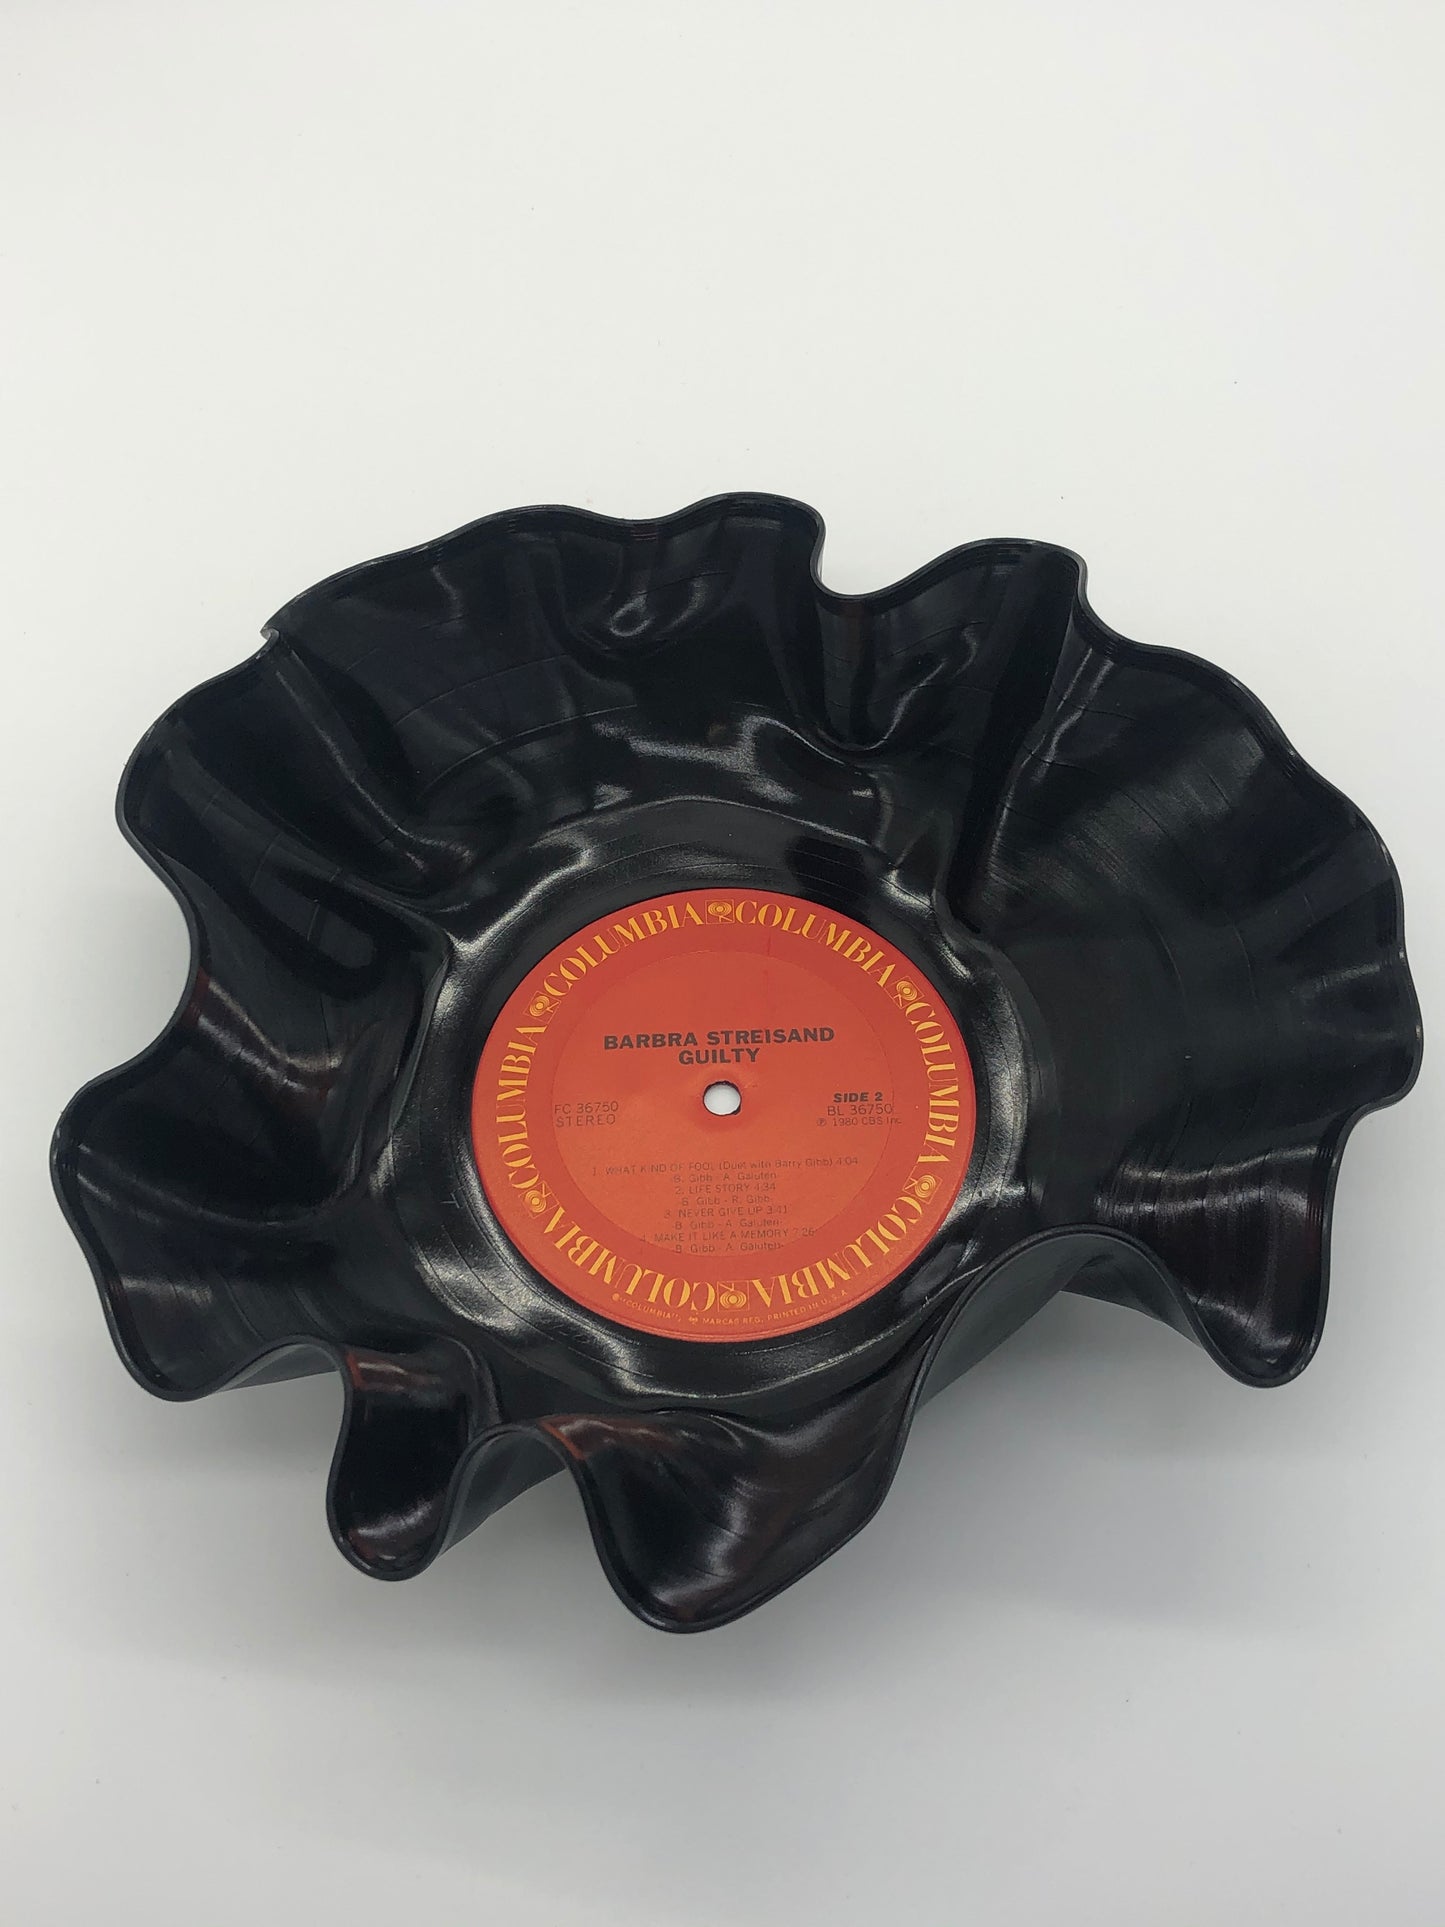 Black bowl with ruffled edges made from a melted record